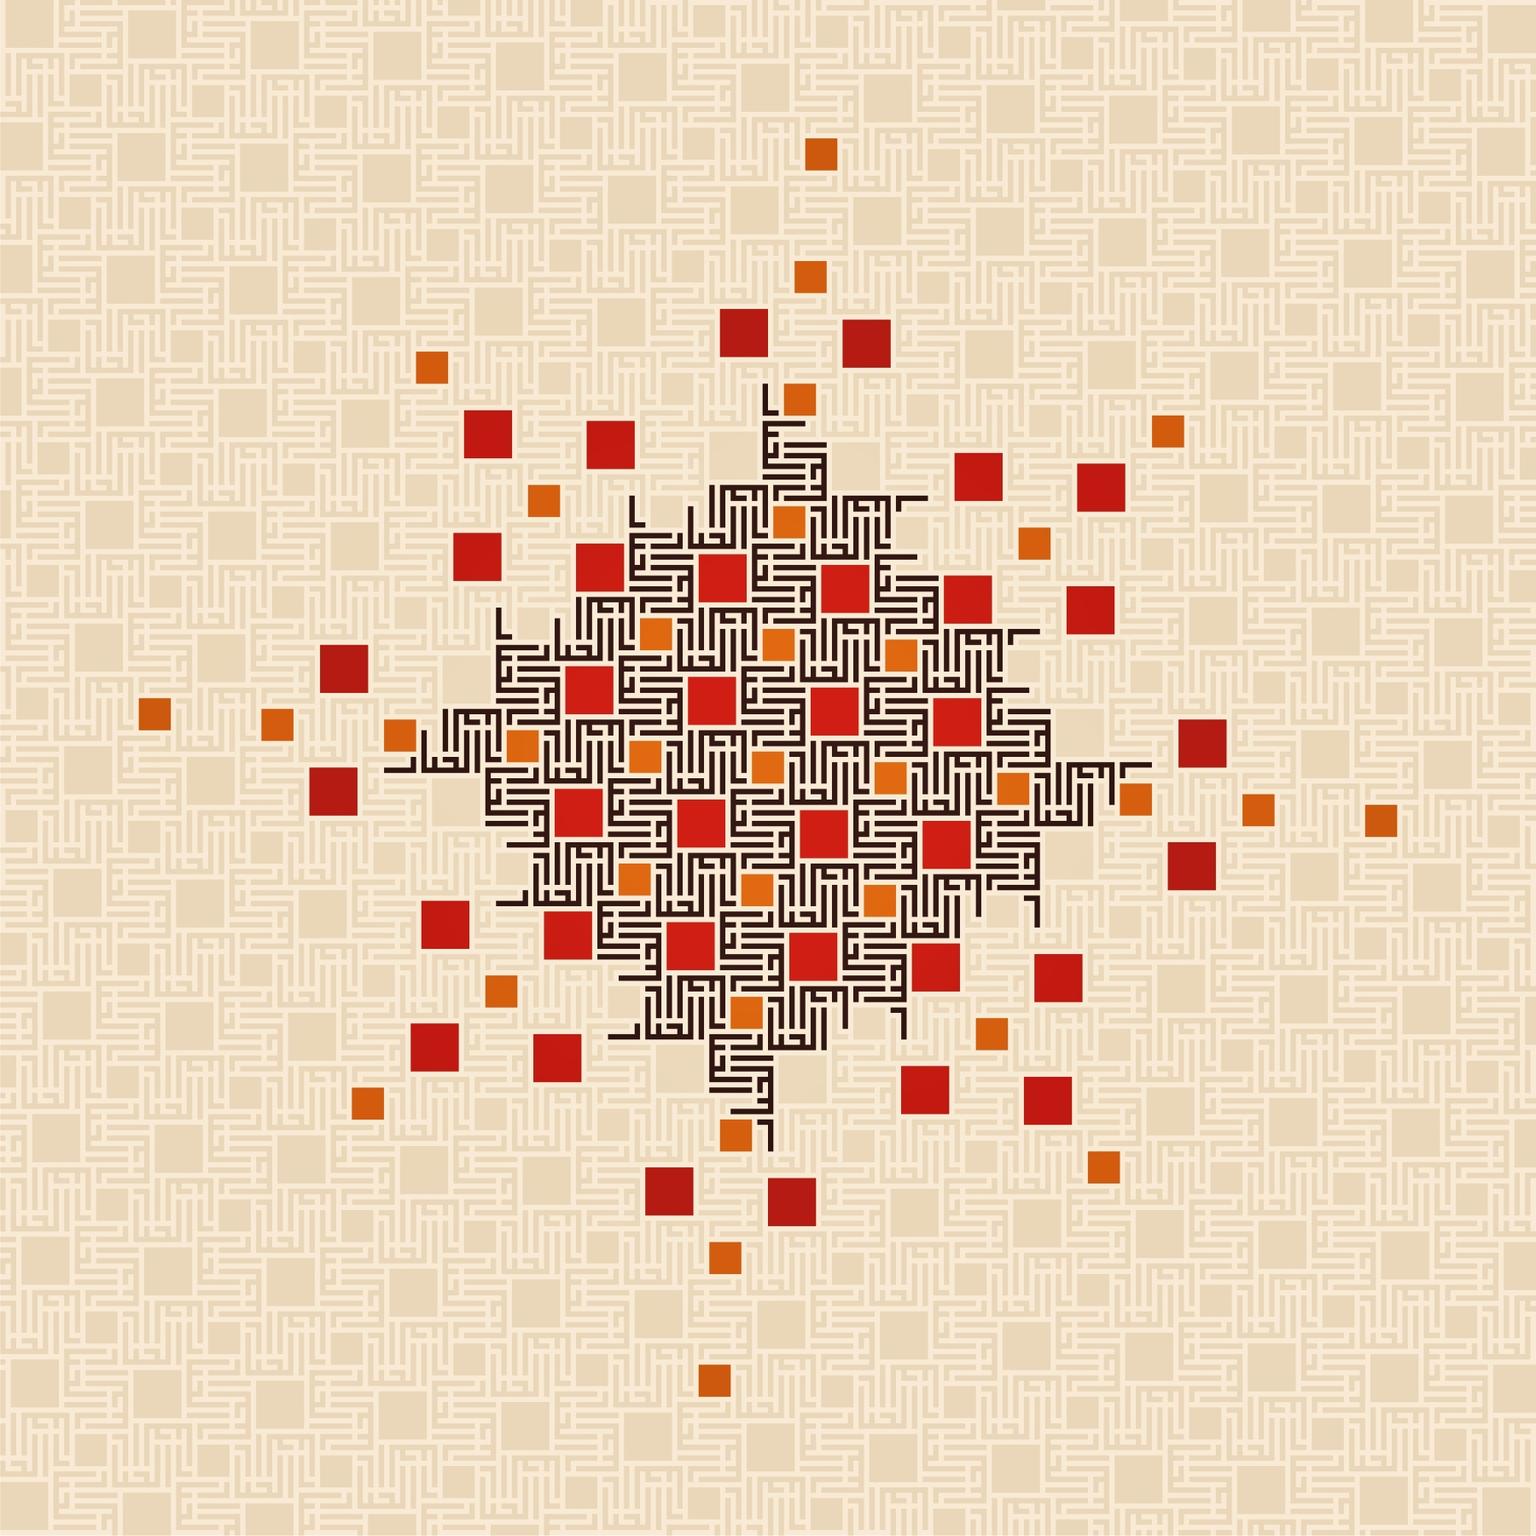 Image for entry 'Red Star - Al Jabbaar, The Irresistible (Islamic calligraphic tessellation)'